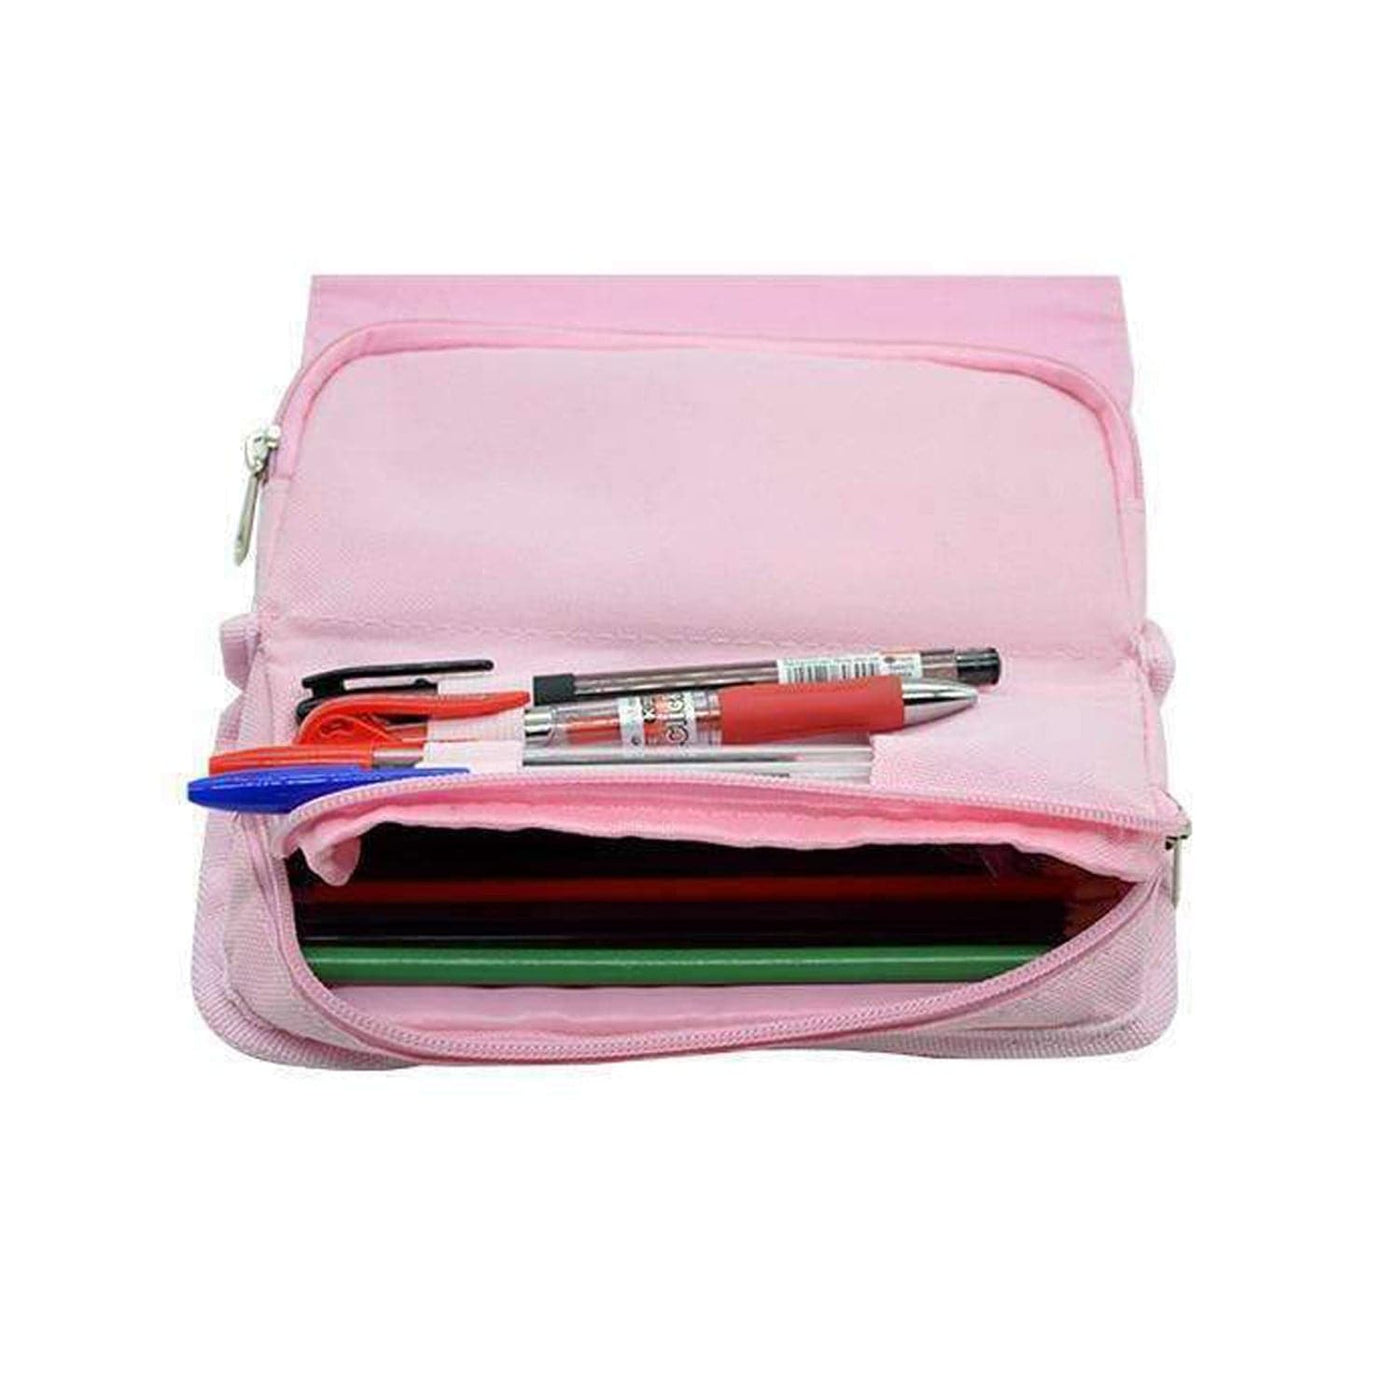 555 - Angel Numbers Pencil Case